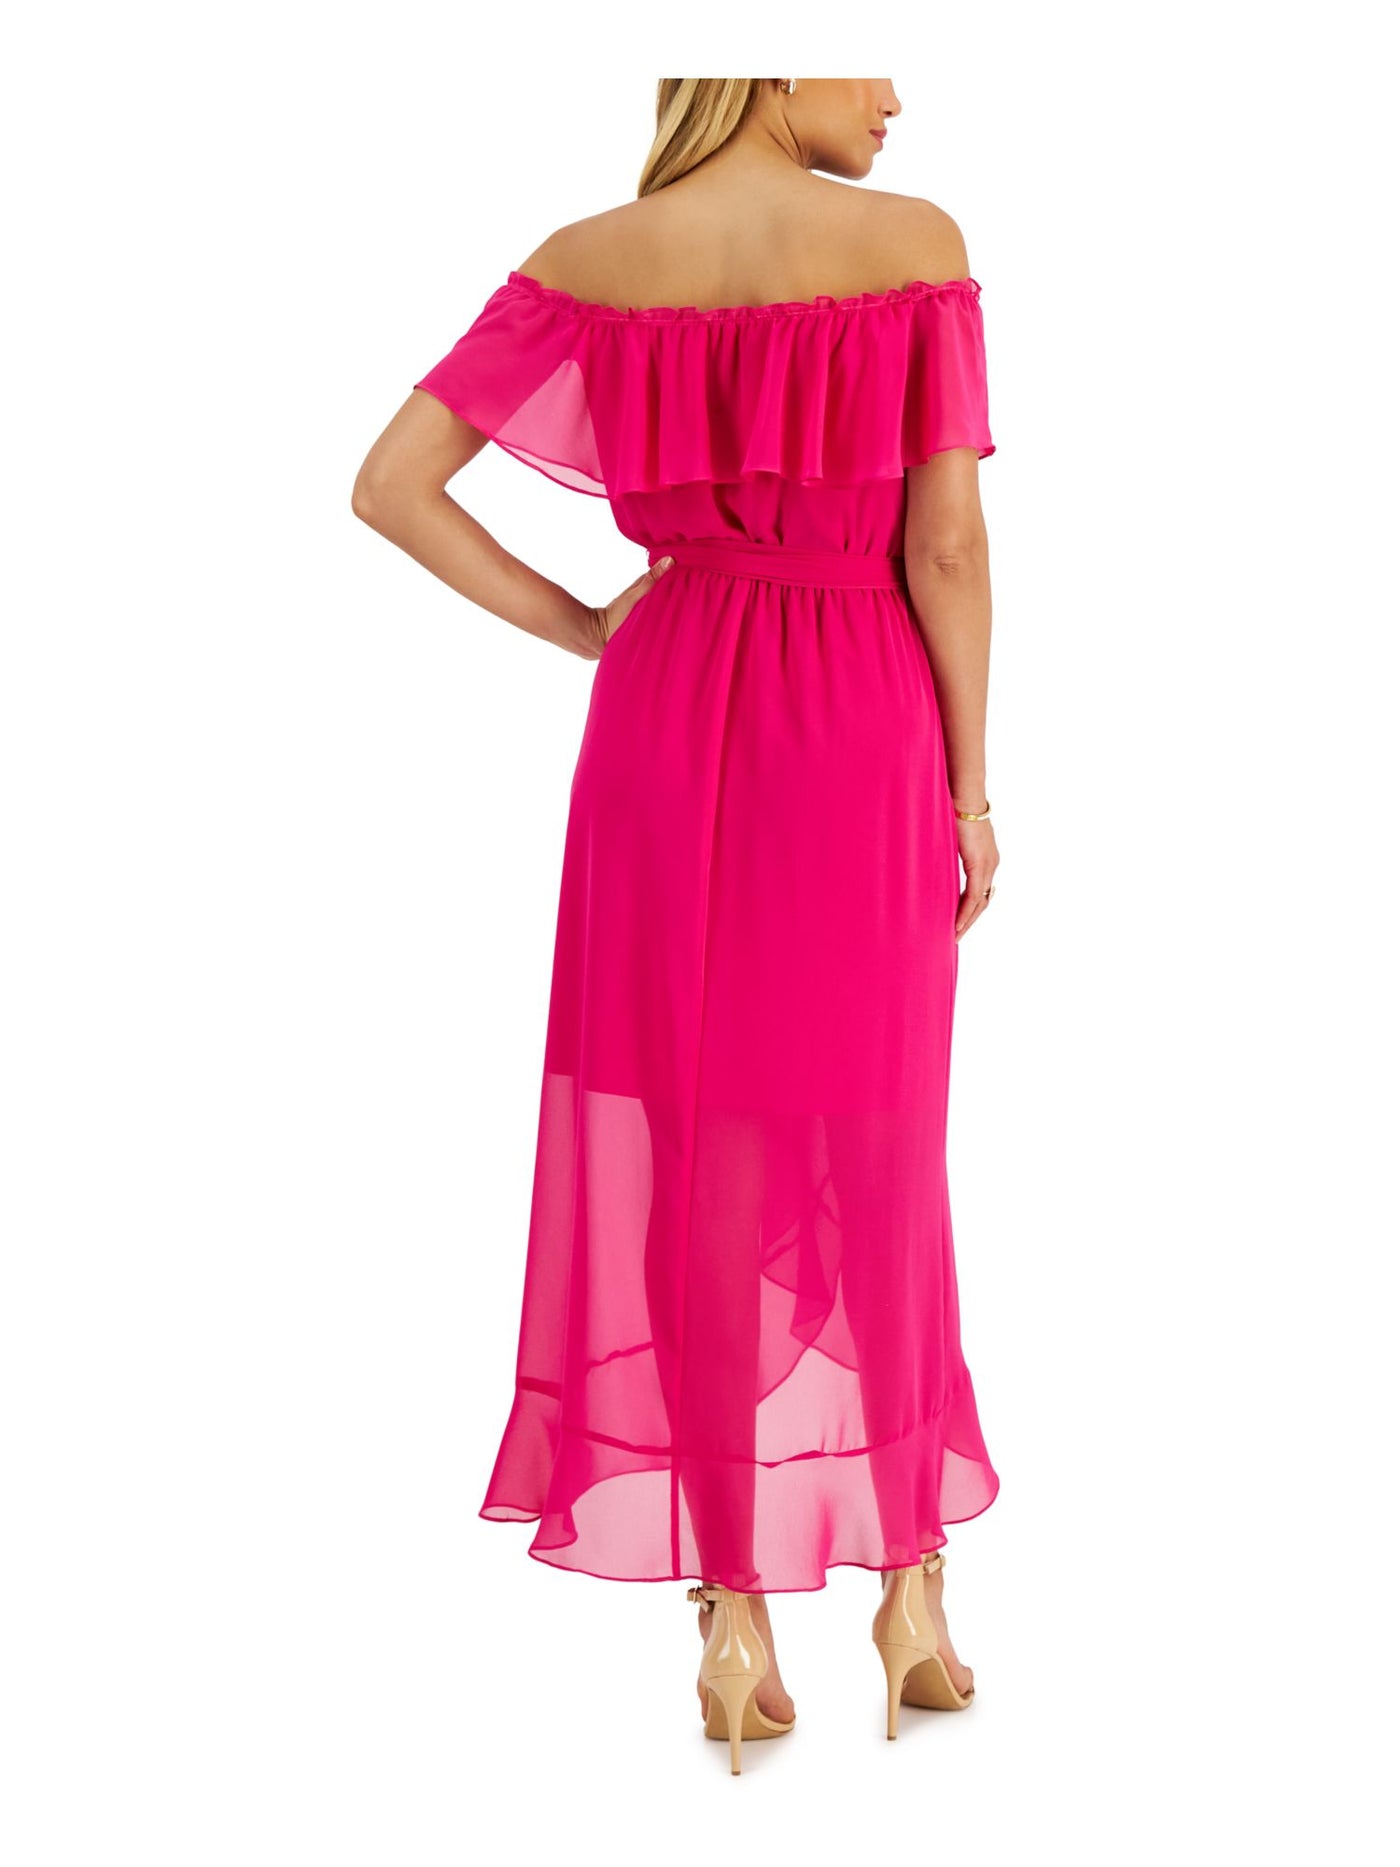 SLNY Womens Pink Ruffled Sheer Lined Tie Waist Short Sleeve Off Shoulder Maxi Party Fit + Flare Dress 6